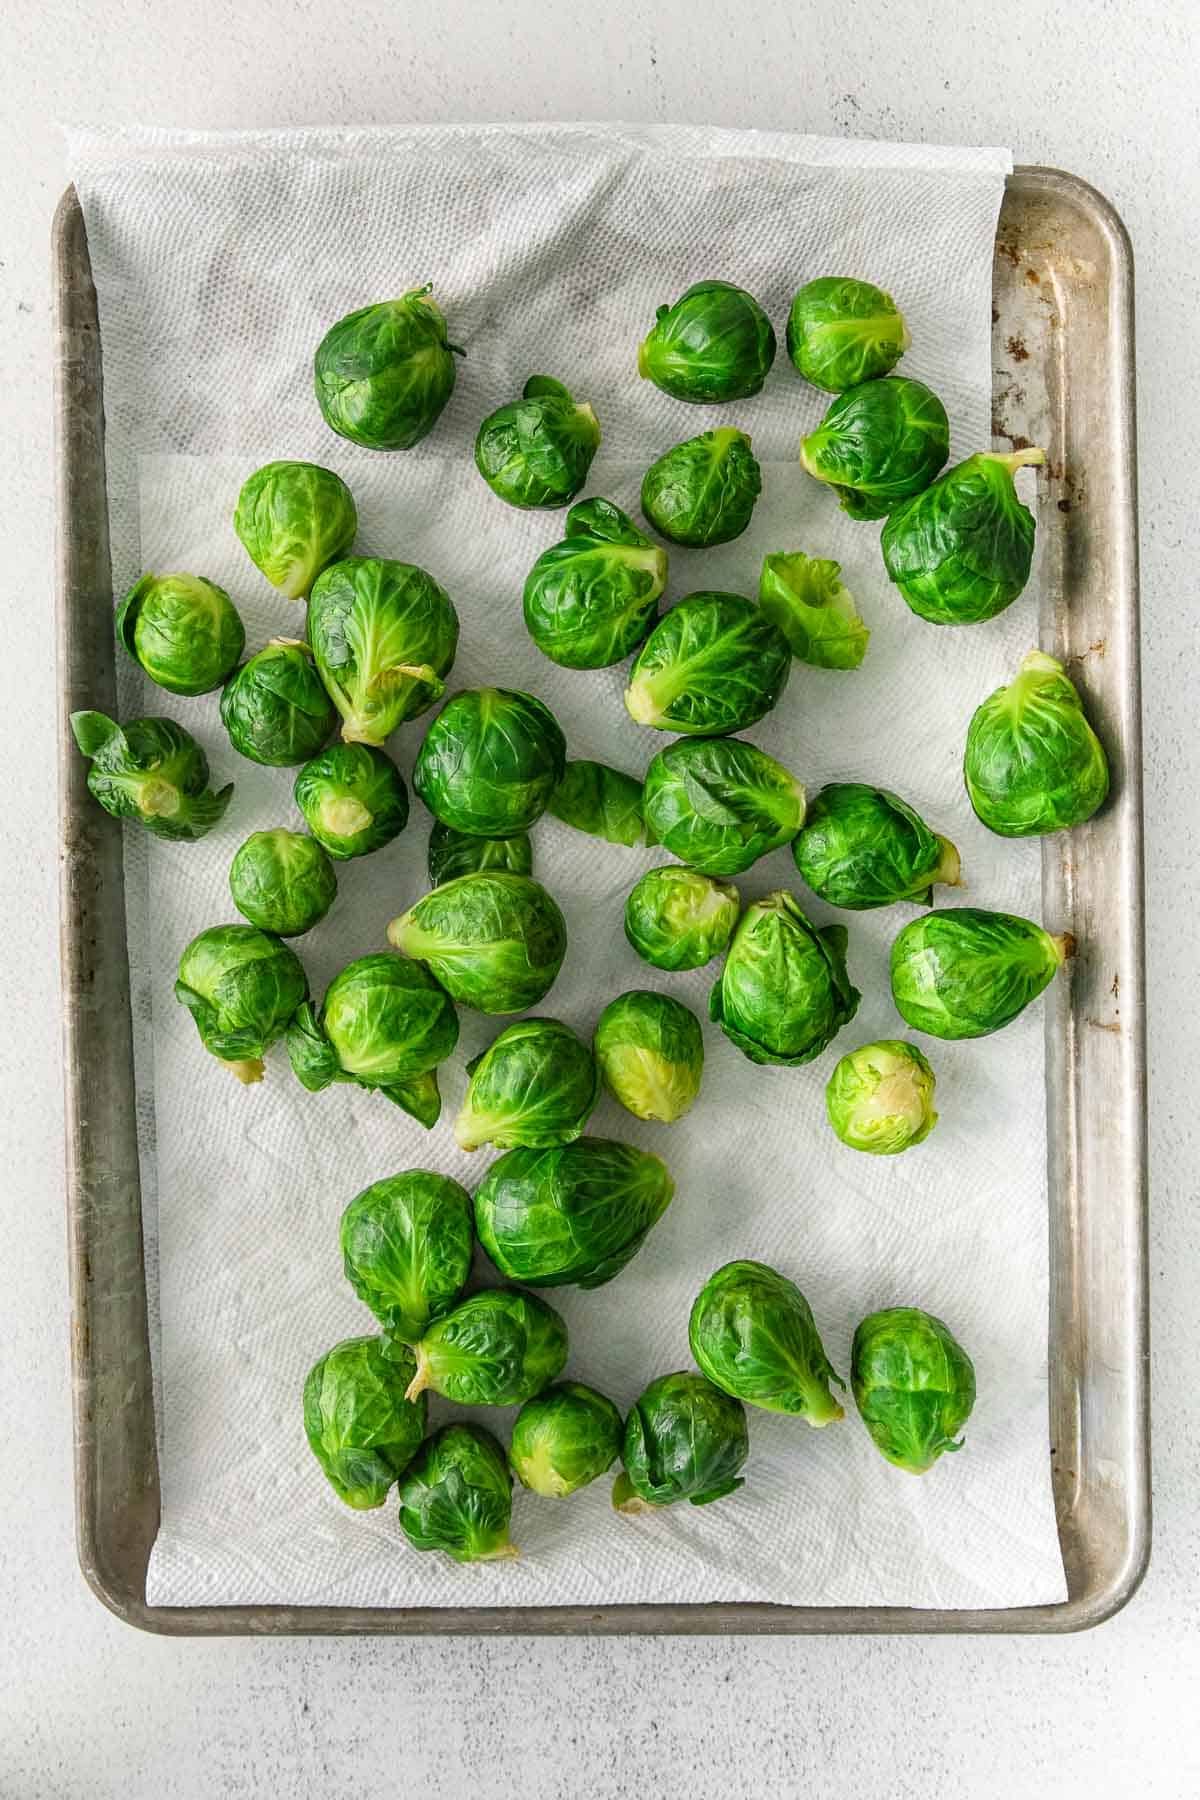 baking sheet full of brussel sprouts.